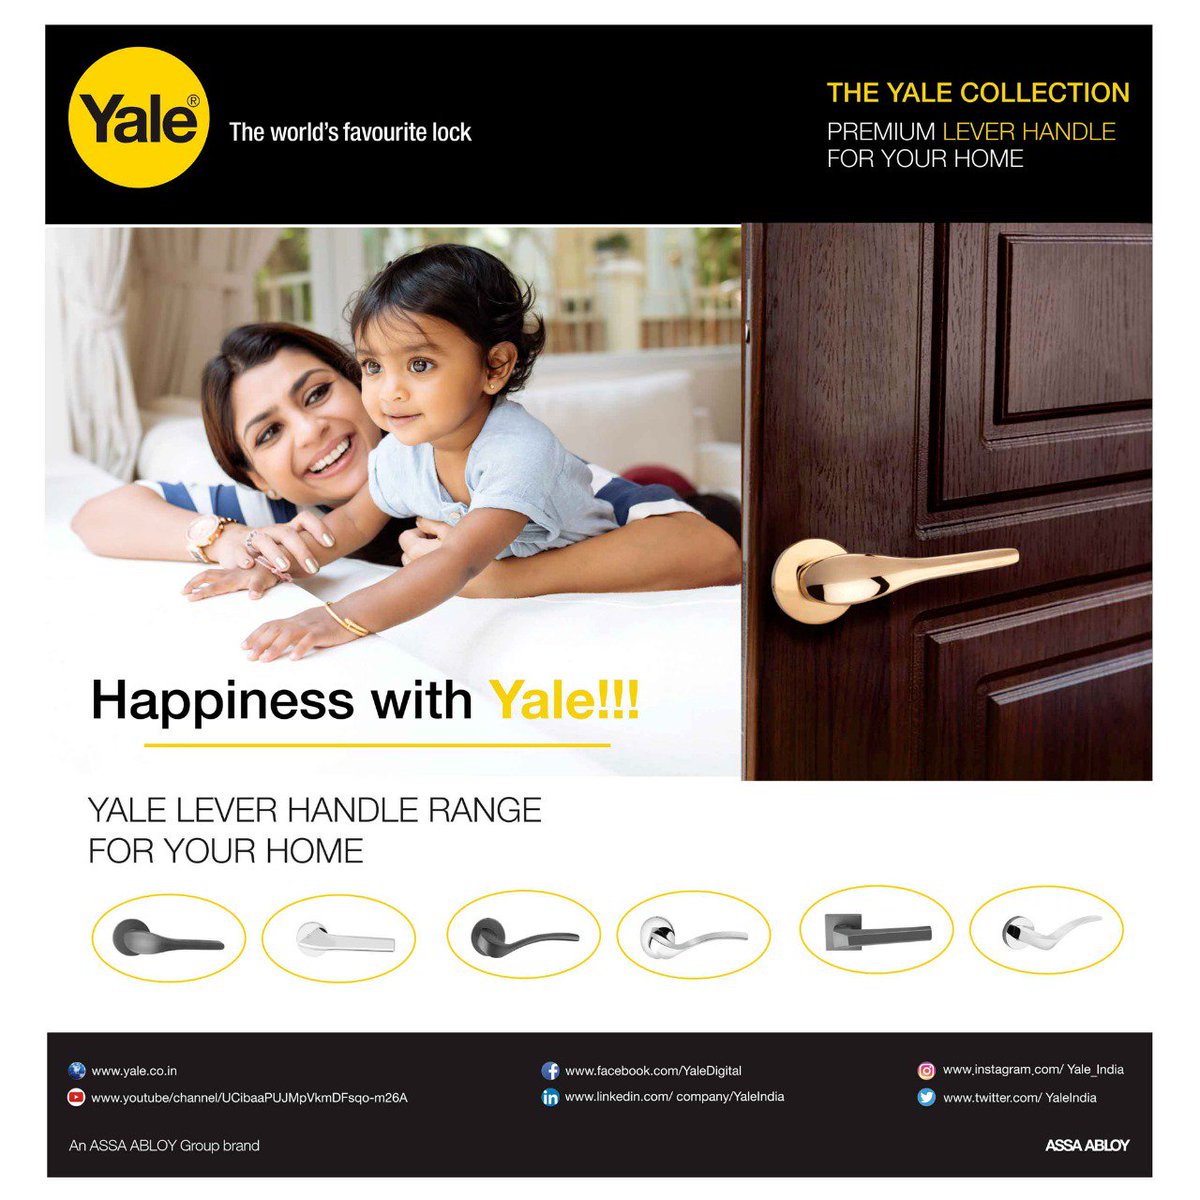 Secure your happiness with YALE lever handles range for home.
#Yale #YaleLocks #AssaAbloy #DoorHardware #DoorLeverHandles #DoorHandles 
@YaleHome @yalelocks